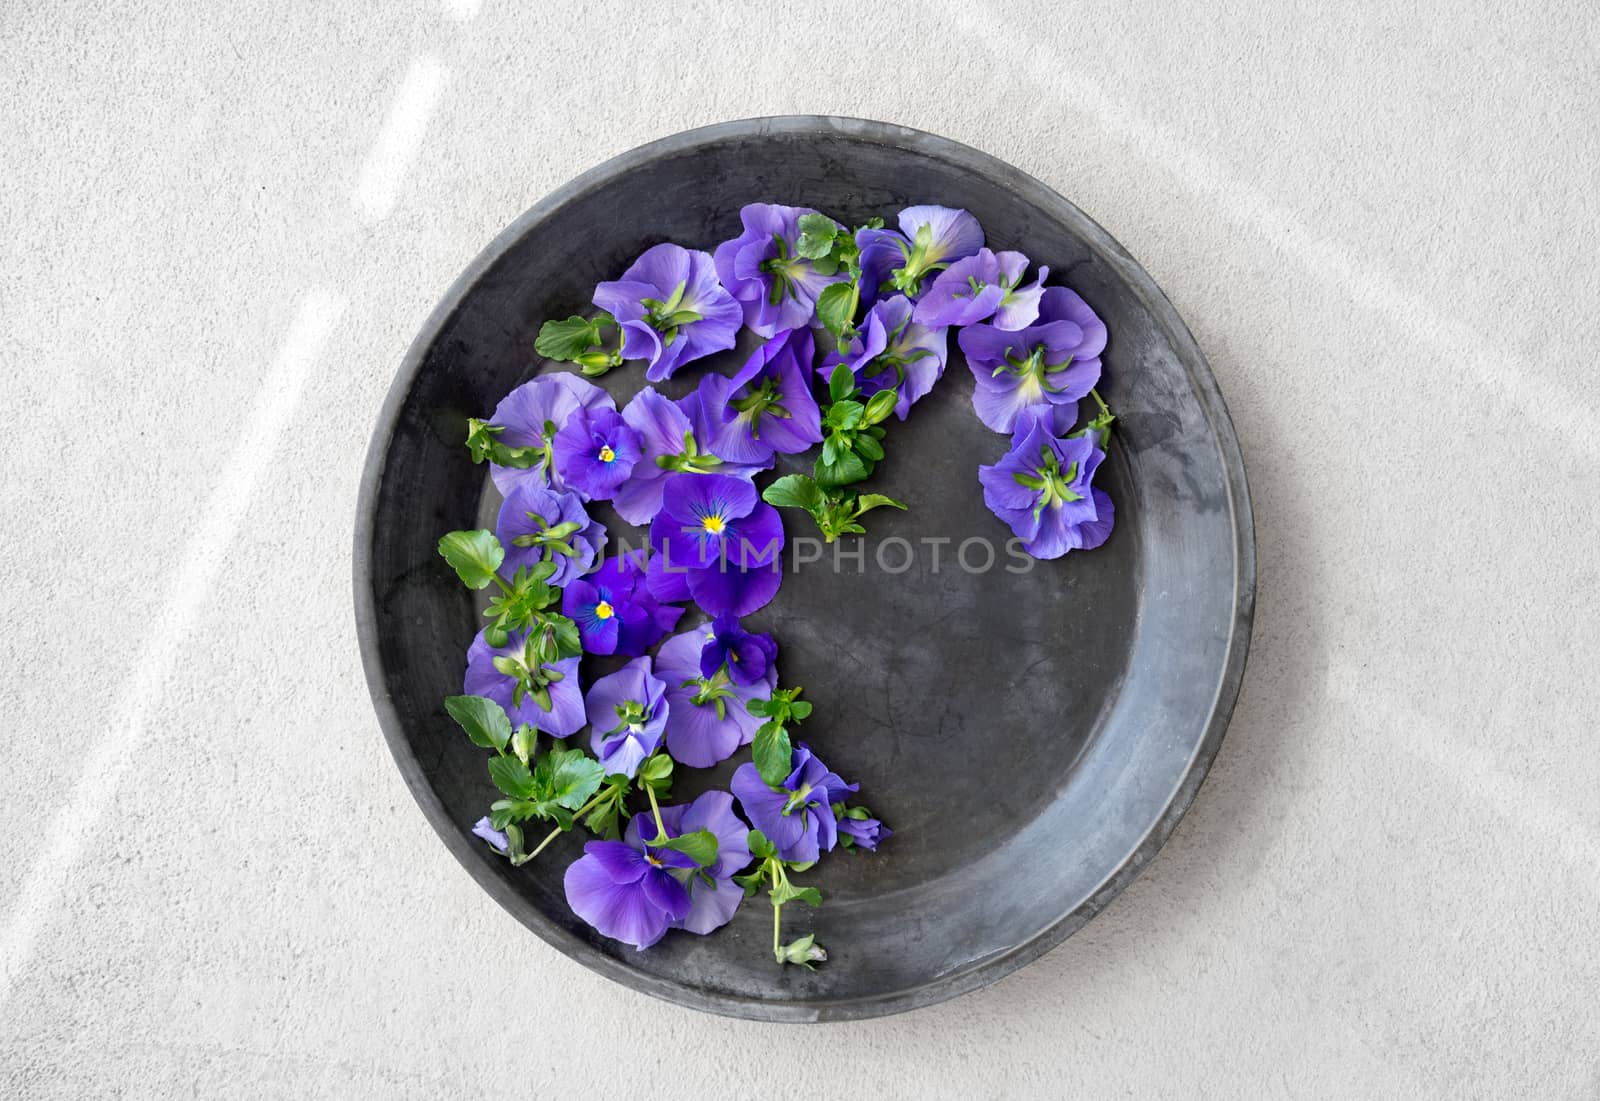 Blue pansies in a metal tray on concrete background by anikasalsera